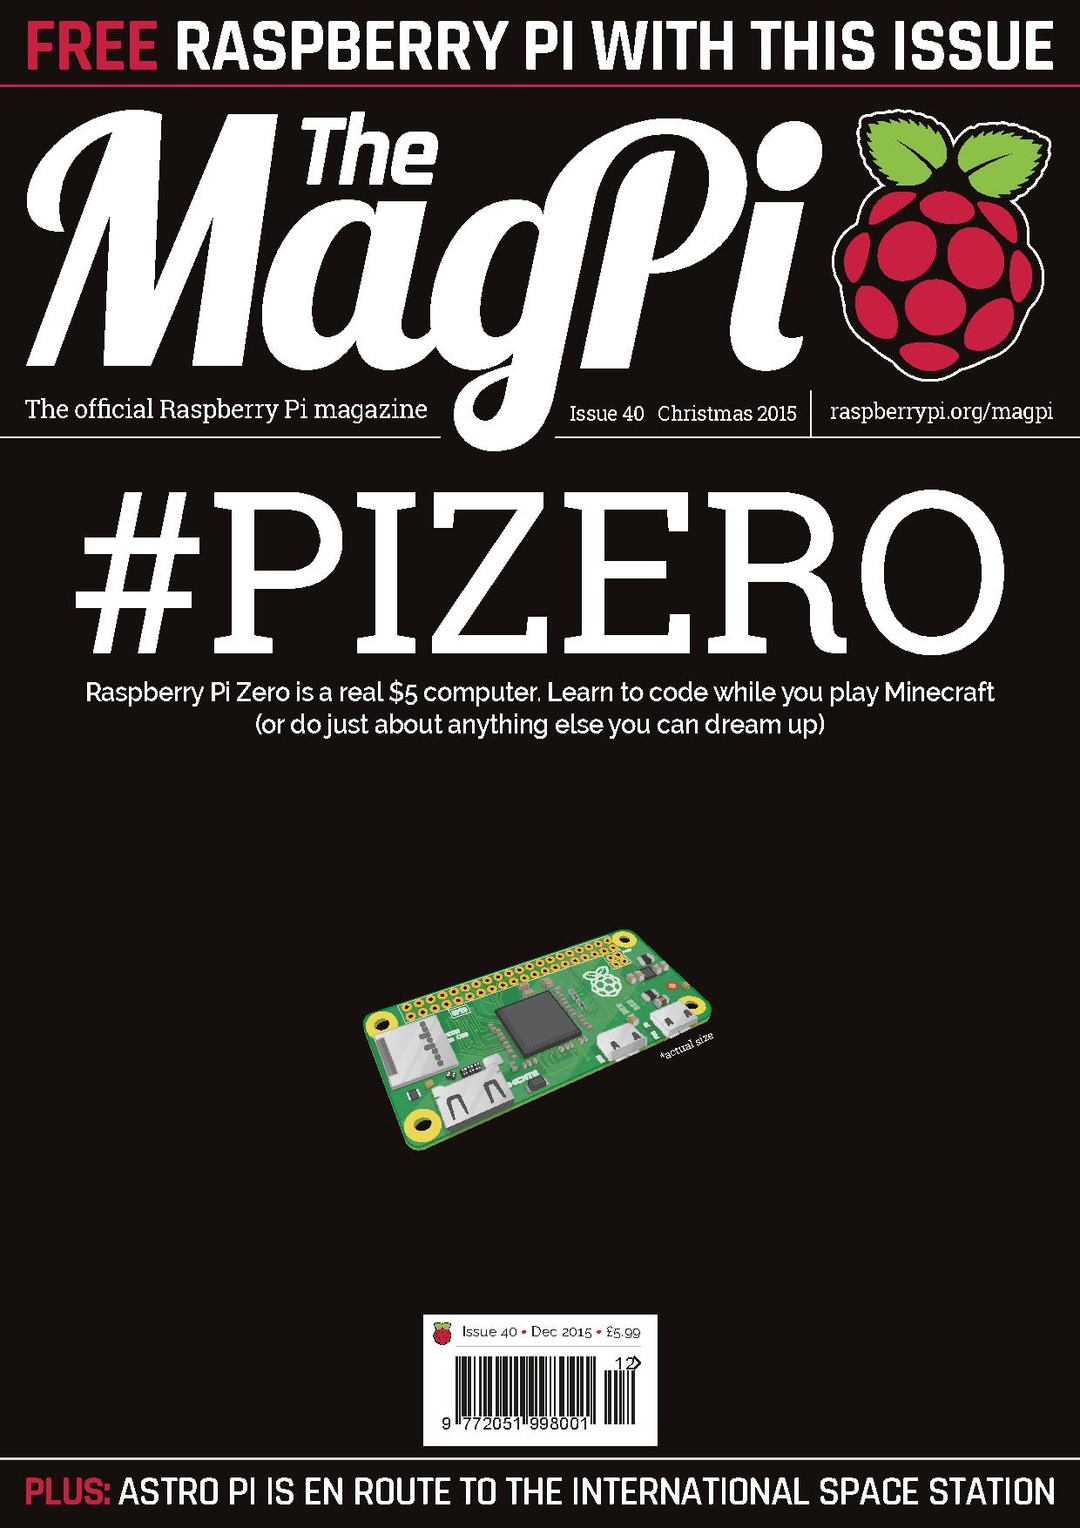 The MagPi